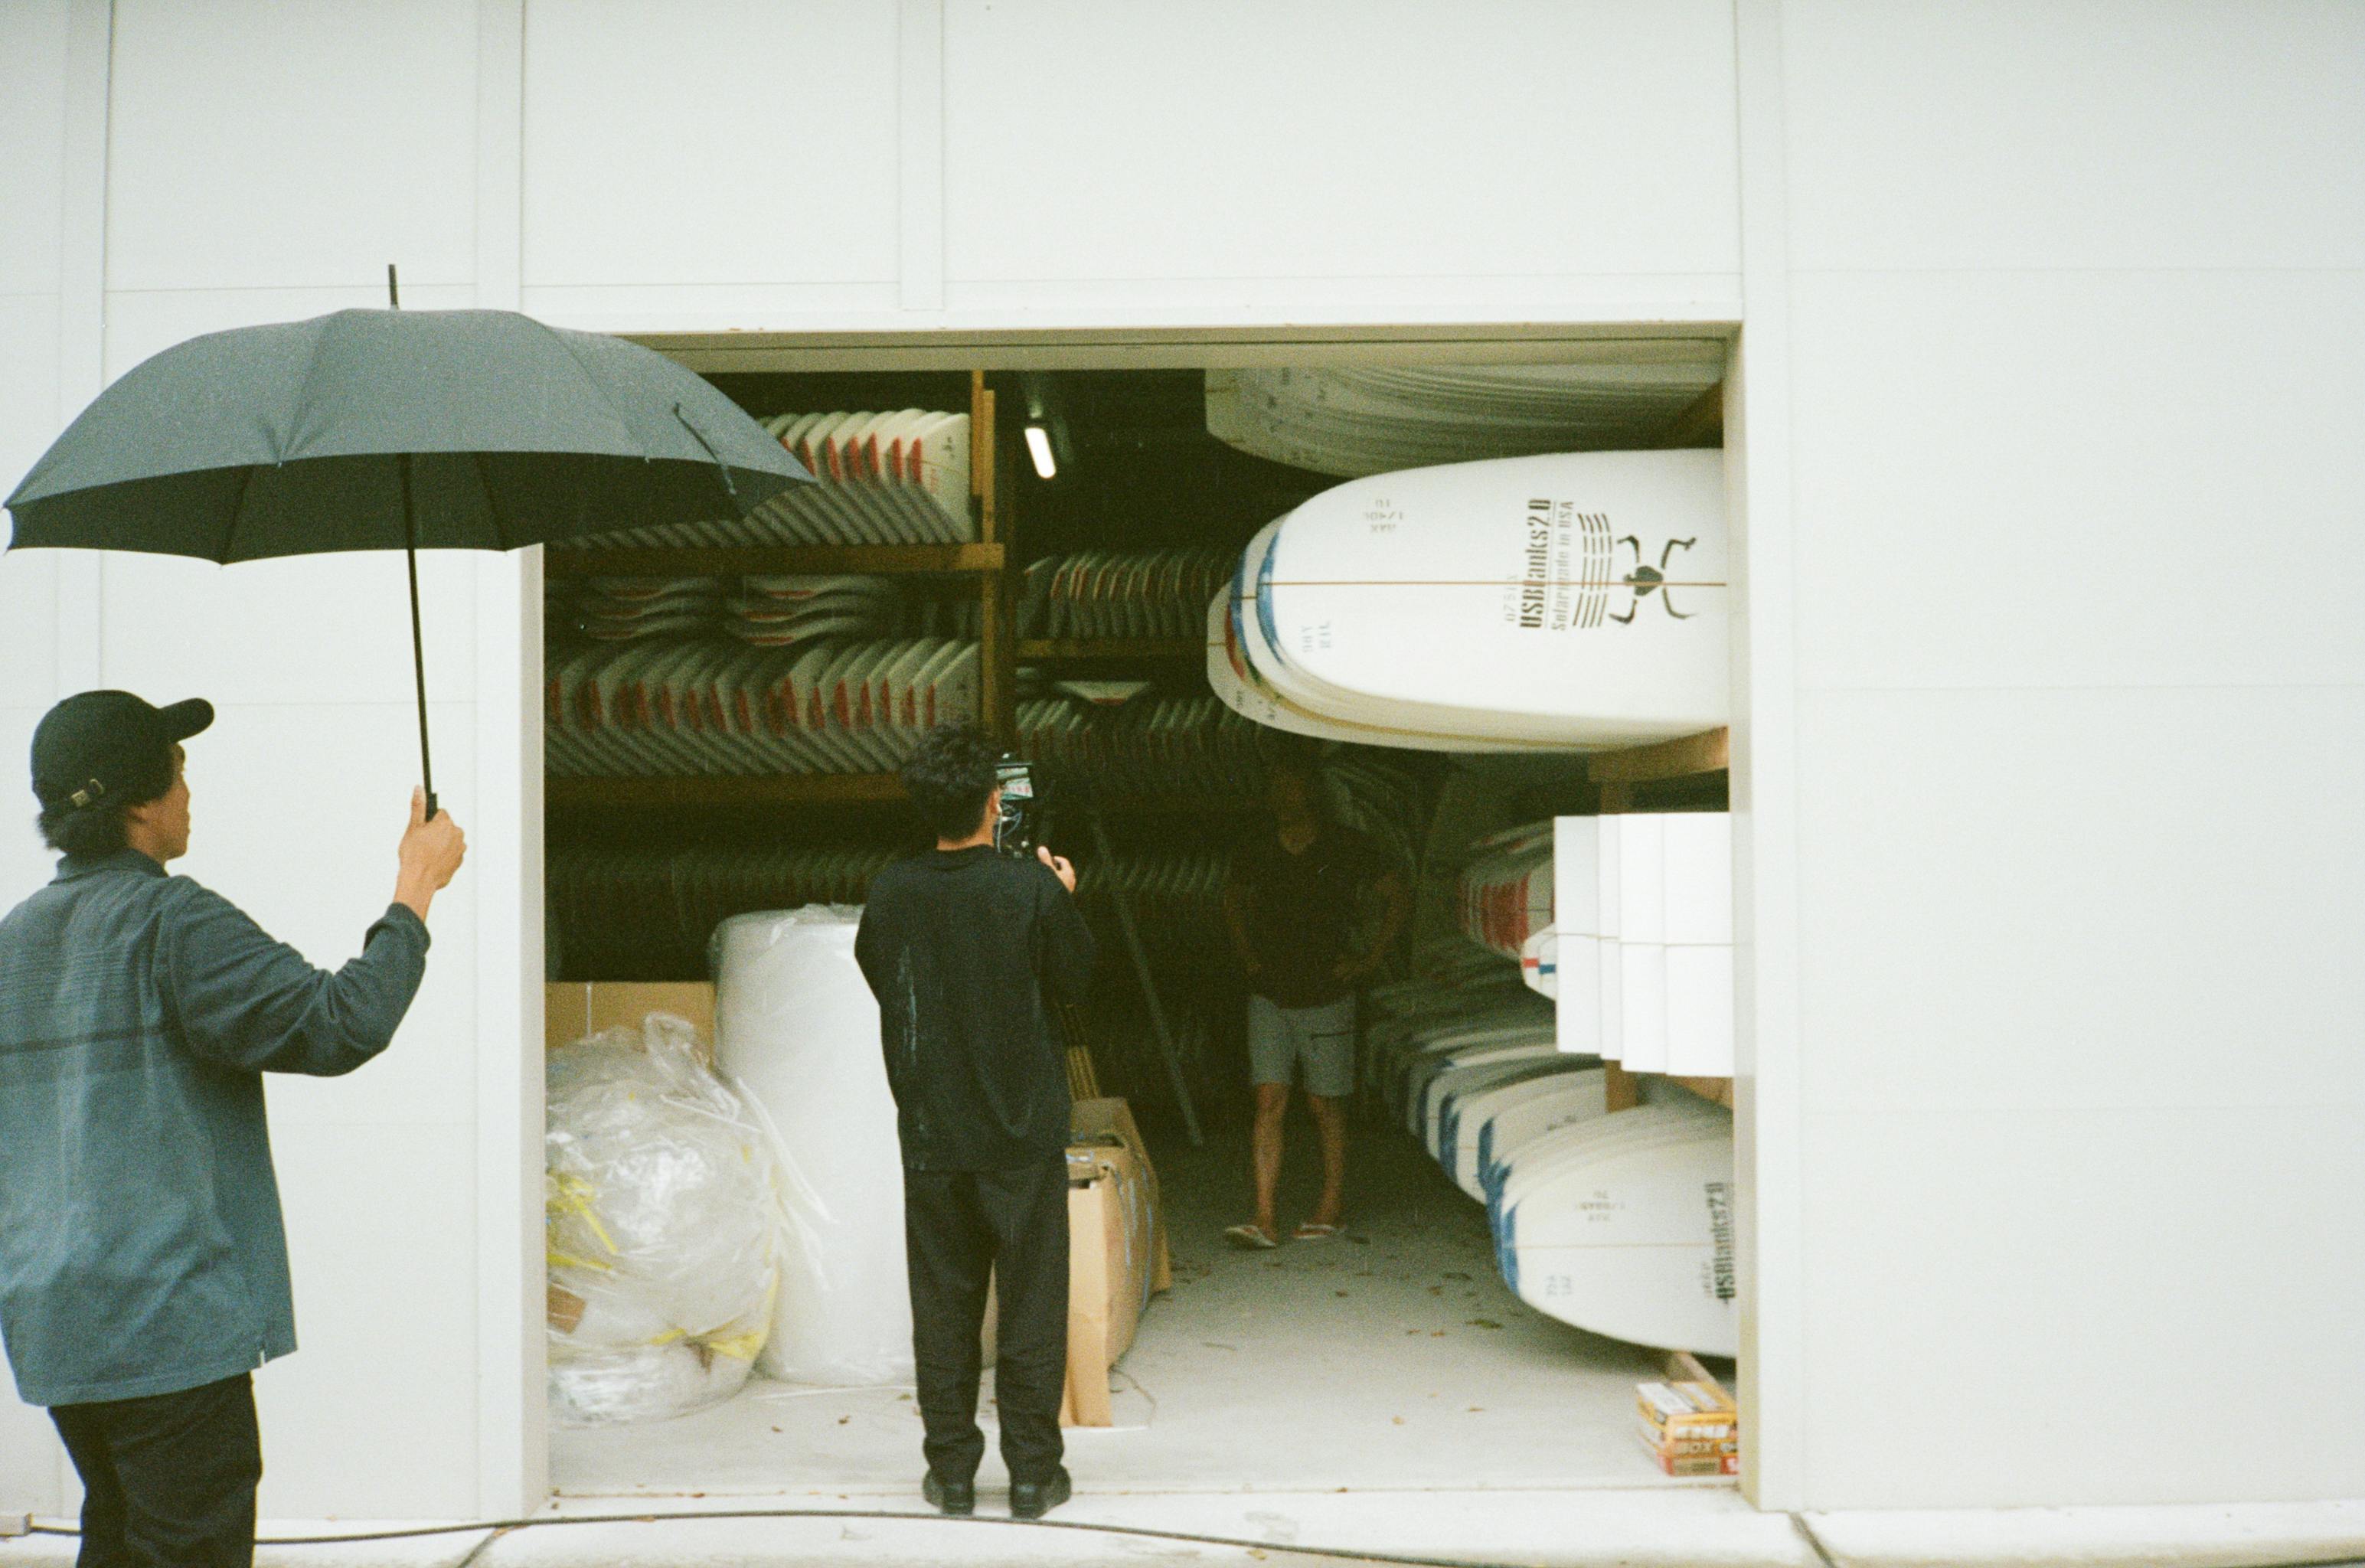 upcoming-studio-wasted-talent-oakley-surf-in-japan-environment-bts-2.jpg